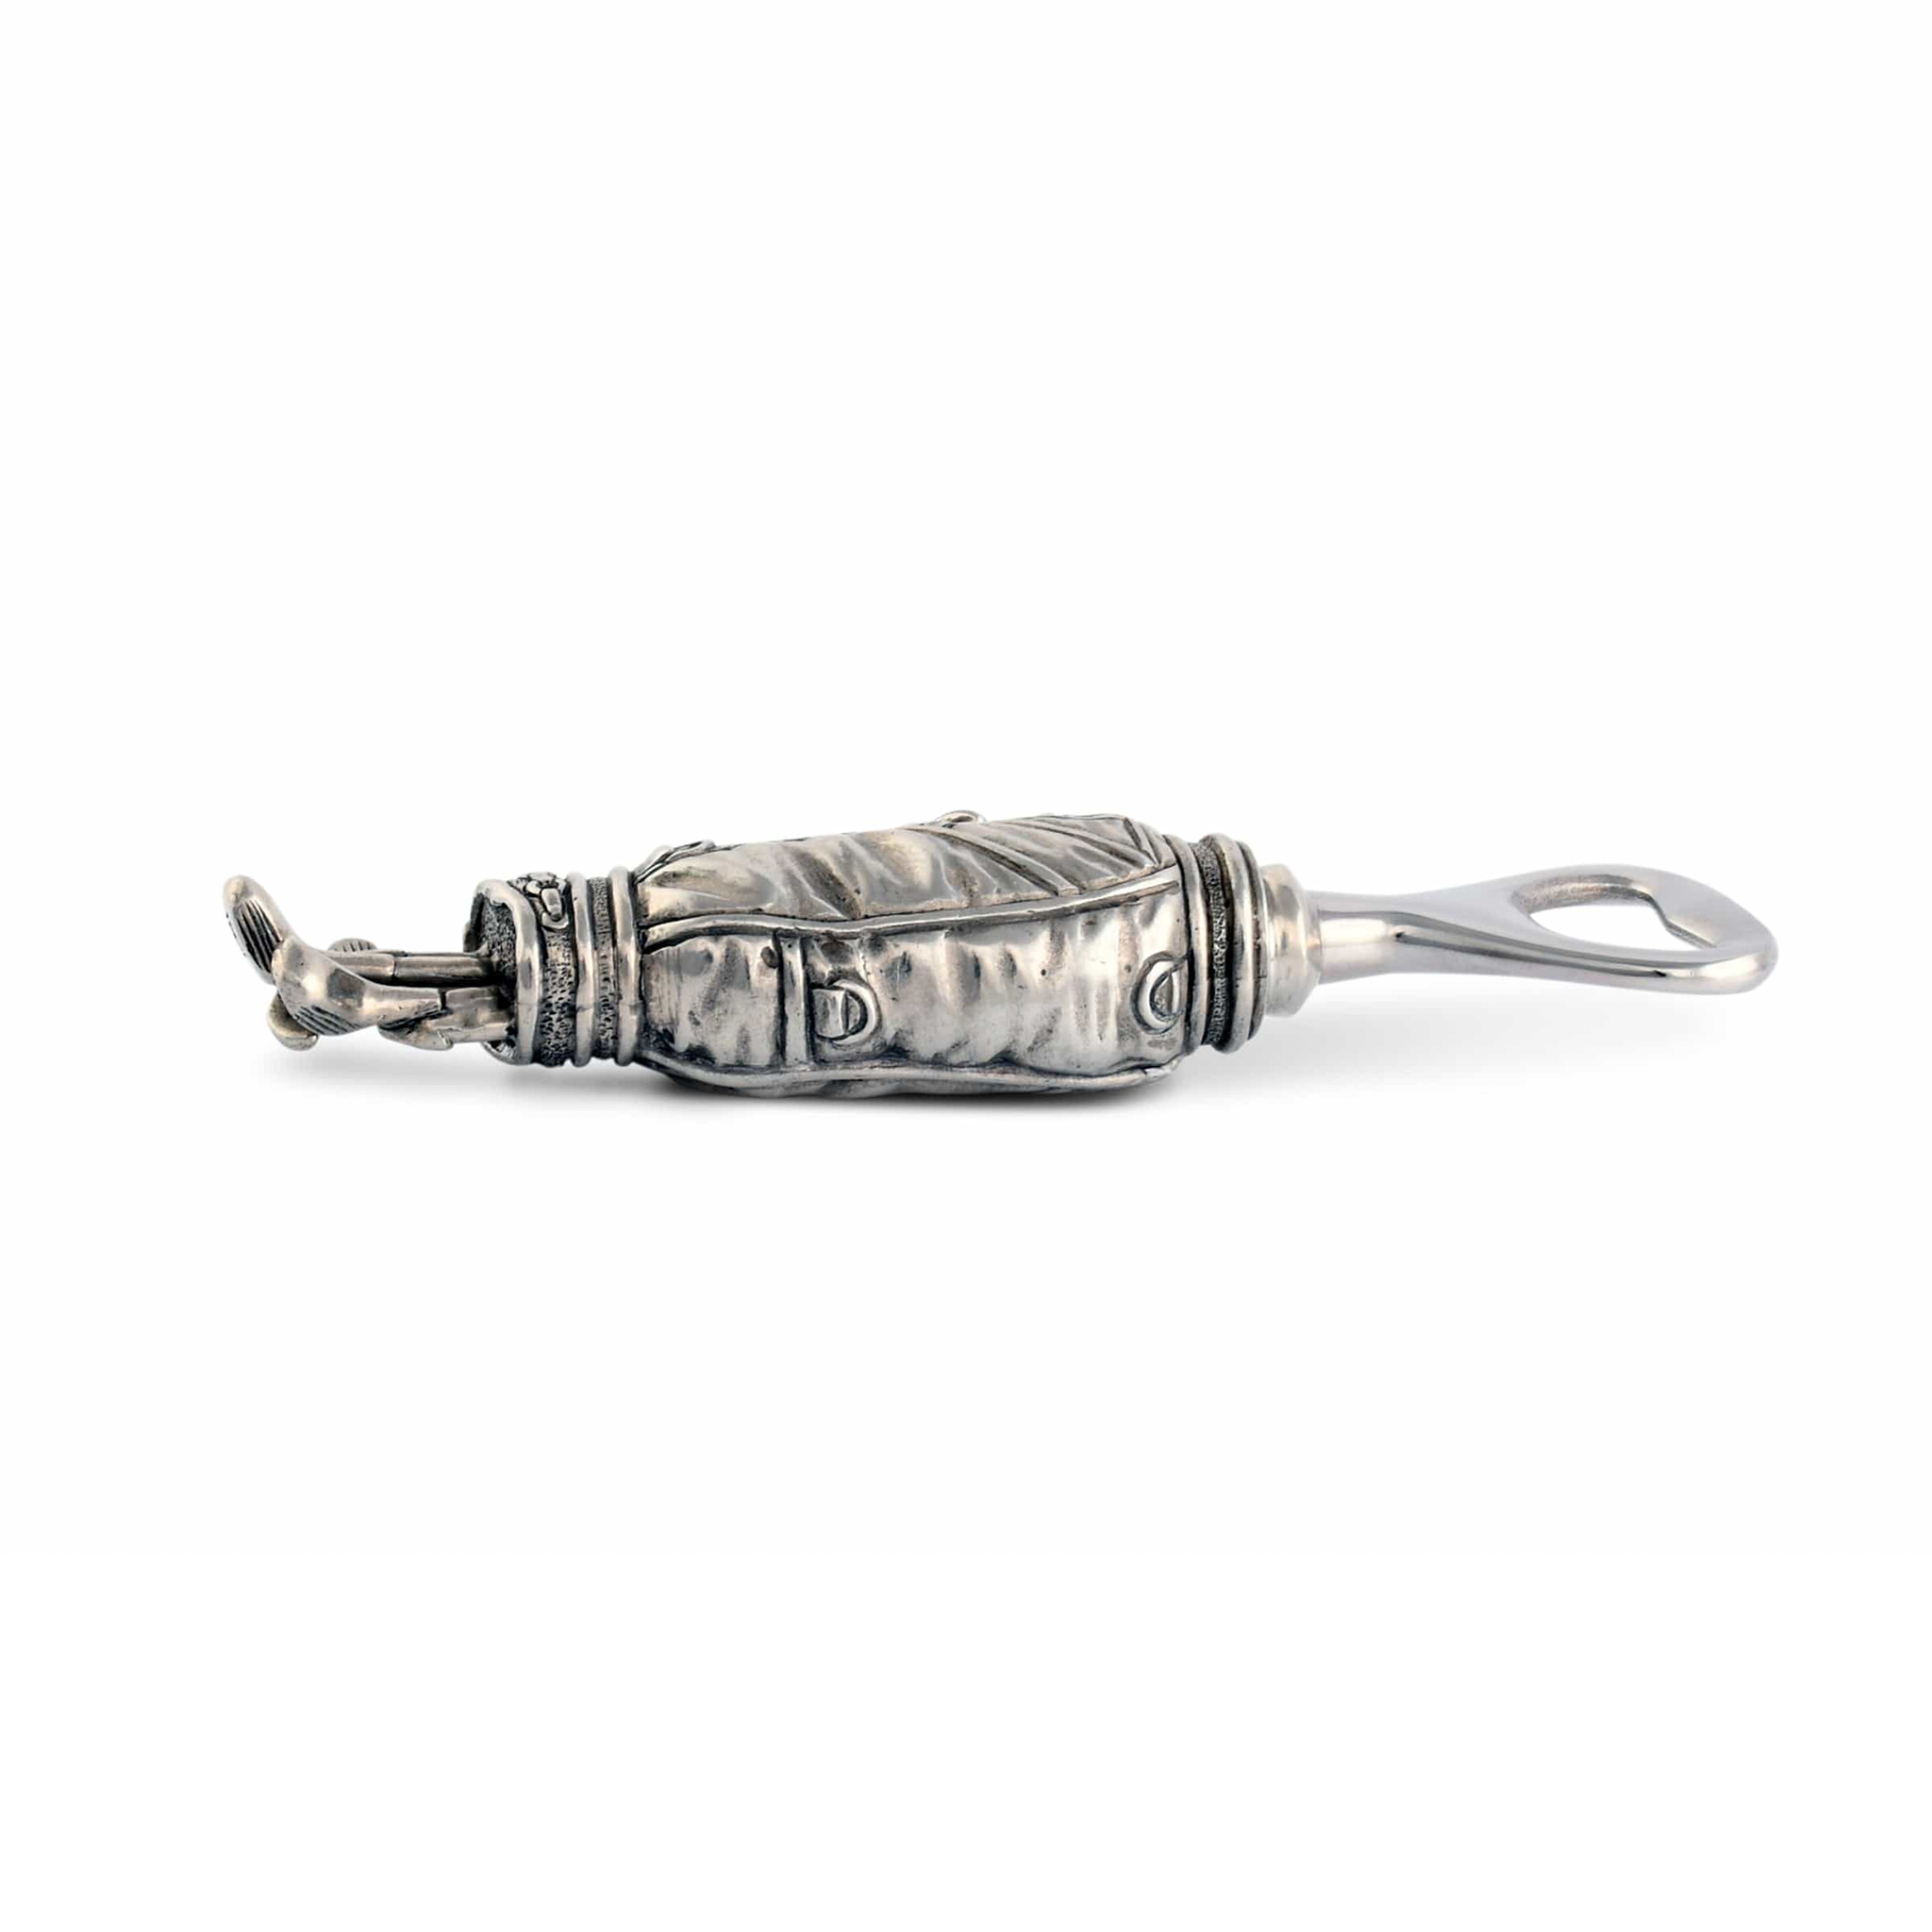 a pewter golf bag bottle opener on a white background